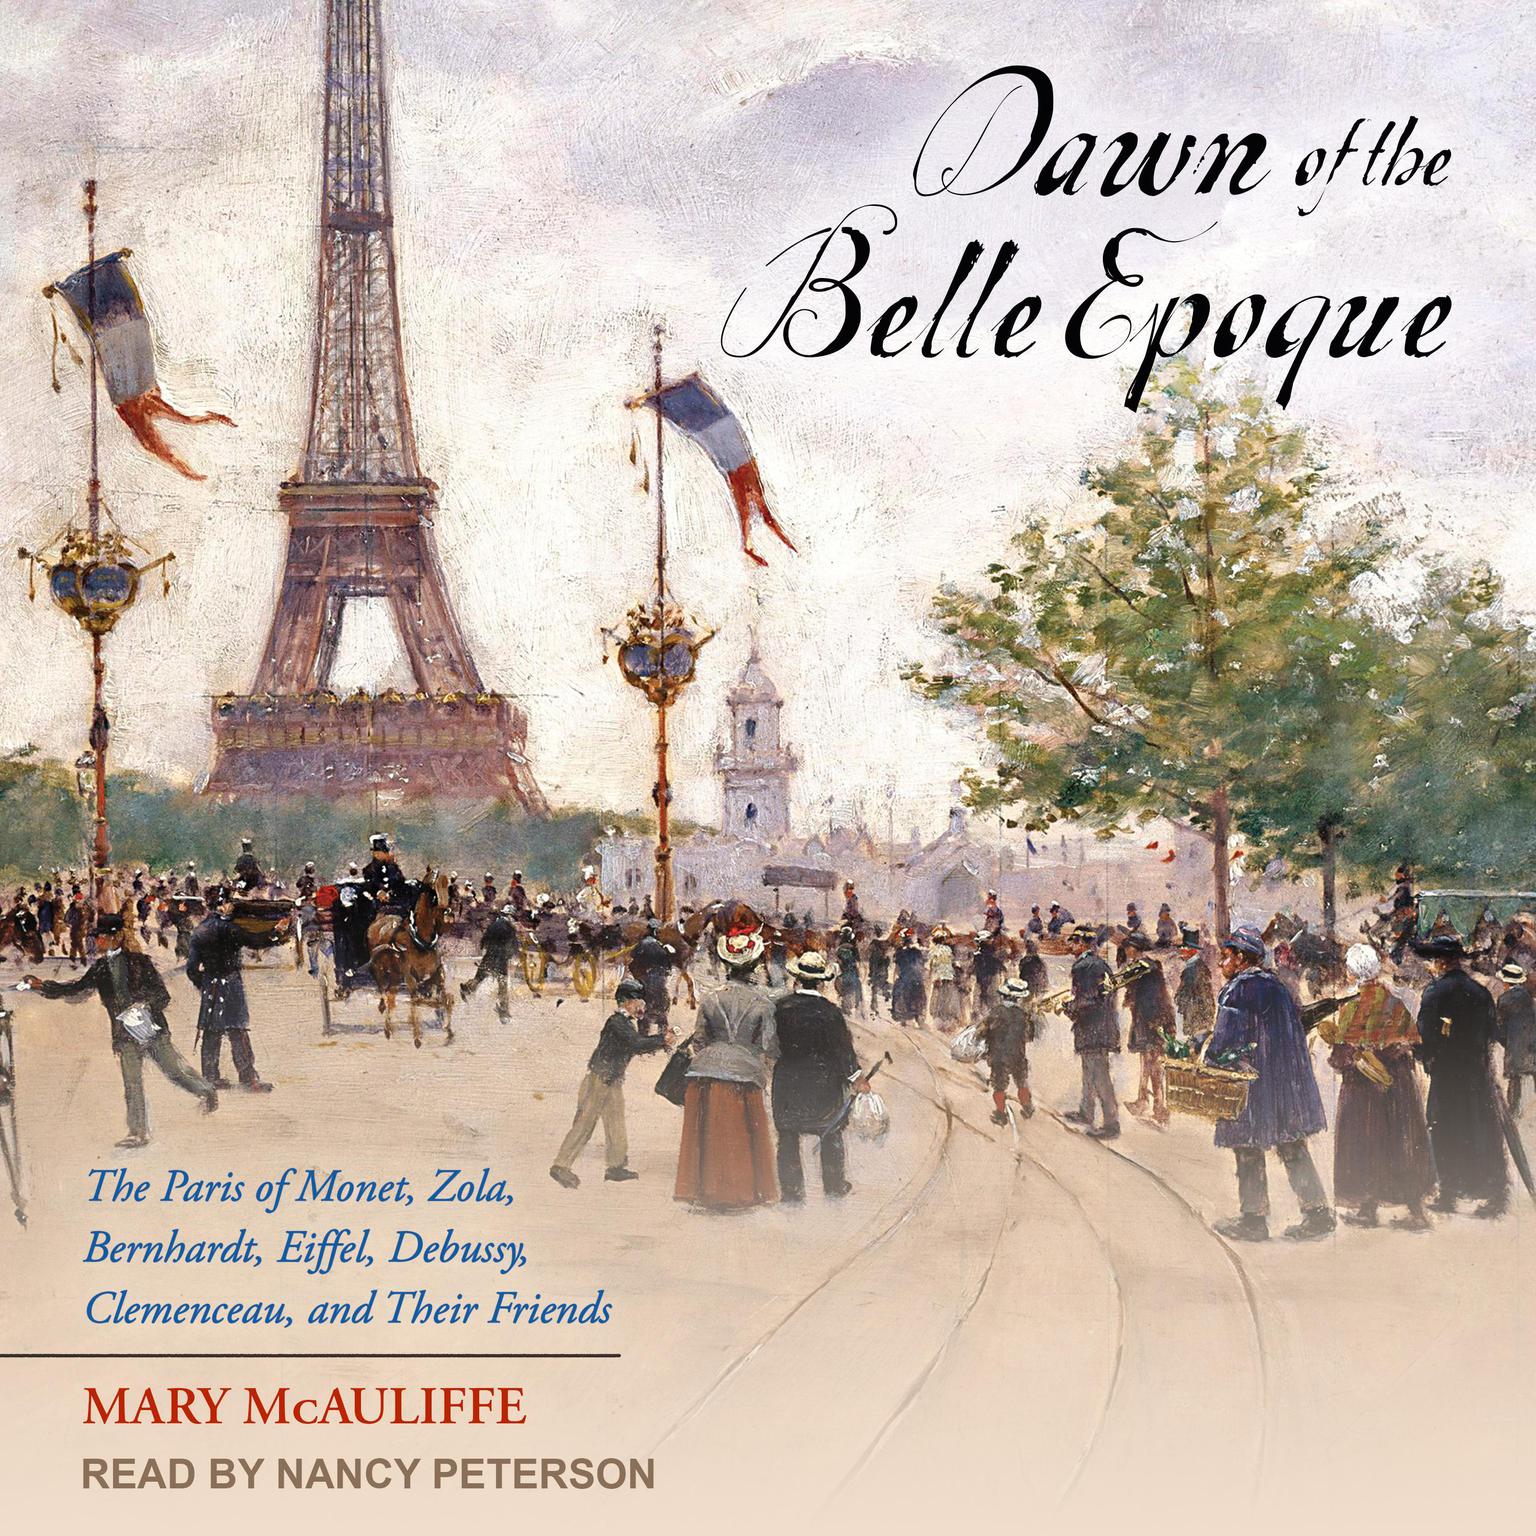 Dawn of the Belle Epoque: The Paris of Monet, Zola, Bernhardt, Eiffel, Debussy, Clemenceau, and Their Friends Audiobook, by Mary McAuliffe